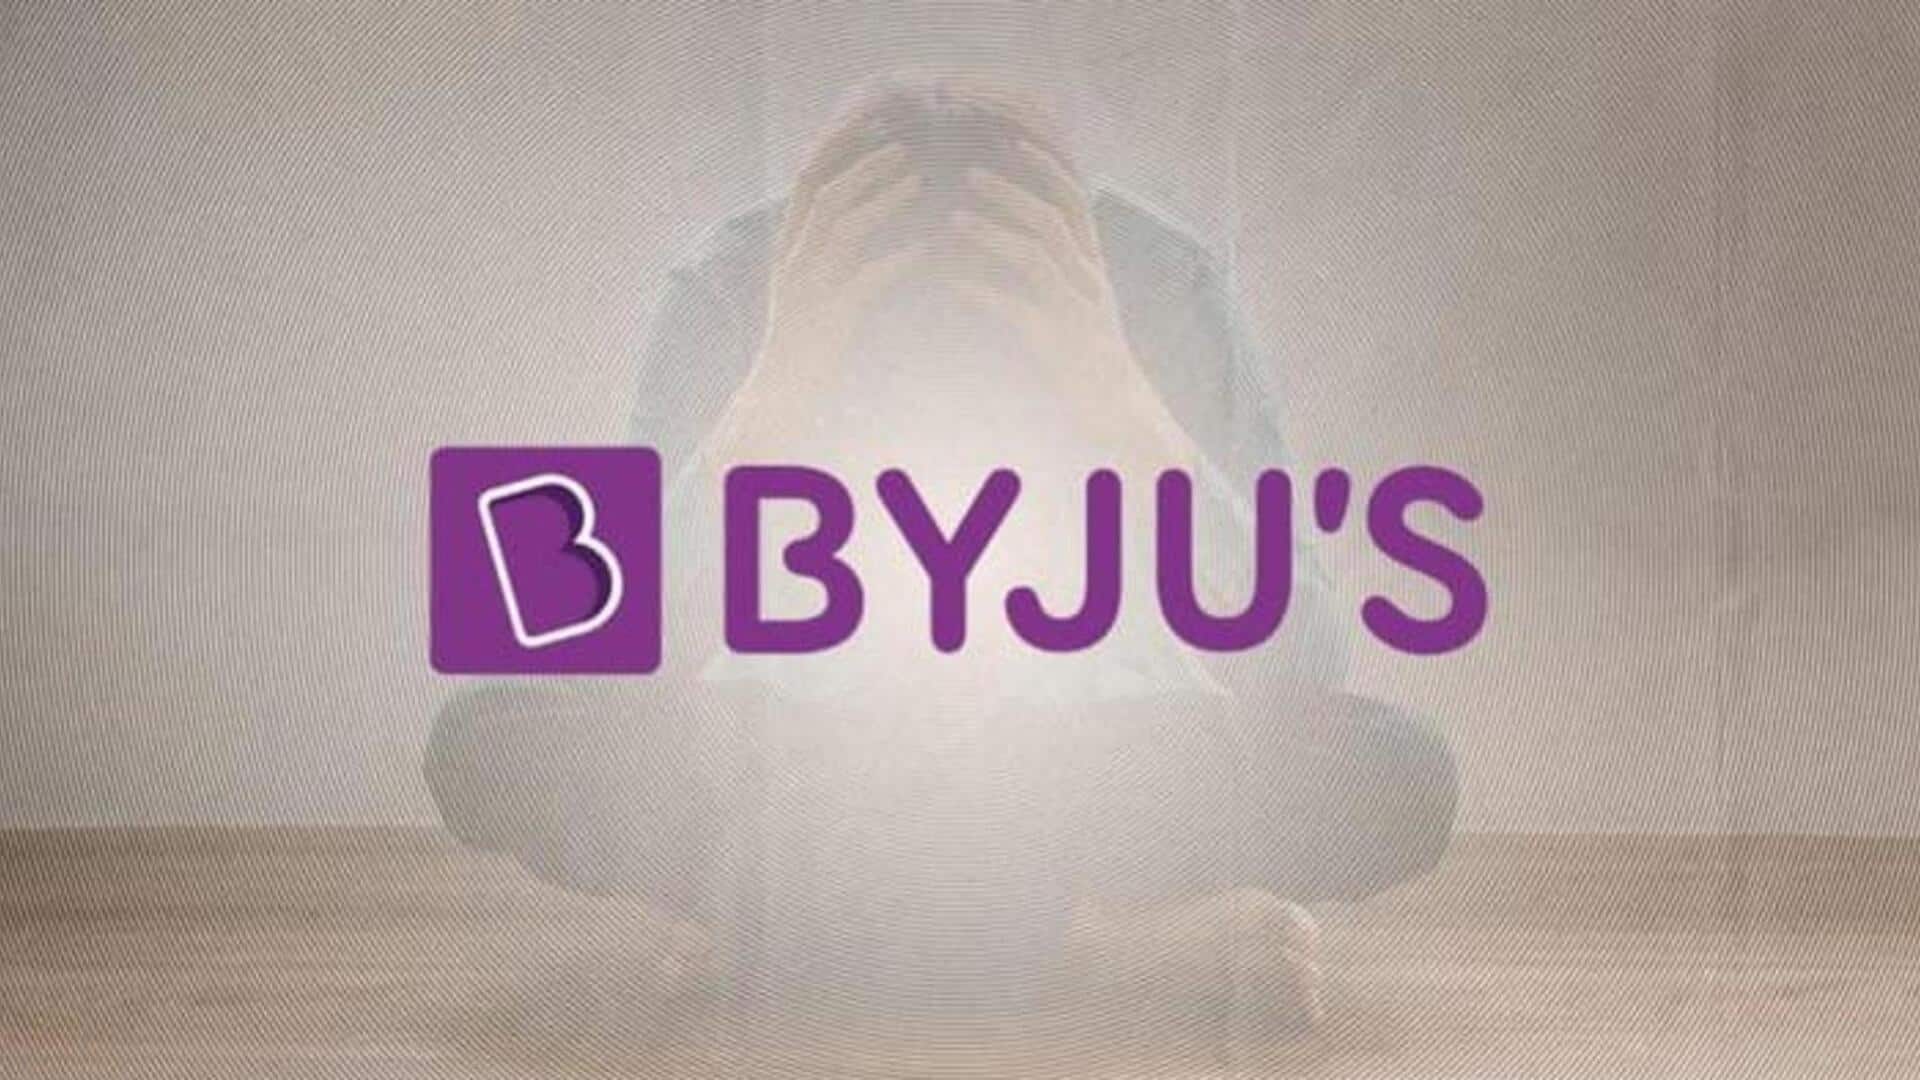 BYJU'S fires over 400 employees after performance review: Report